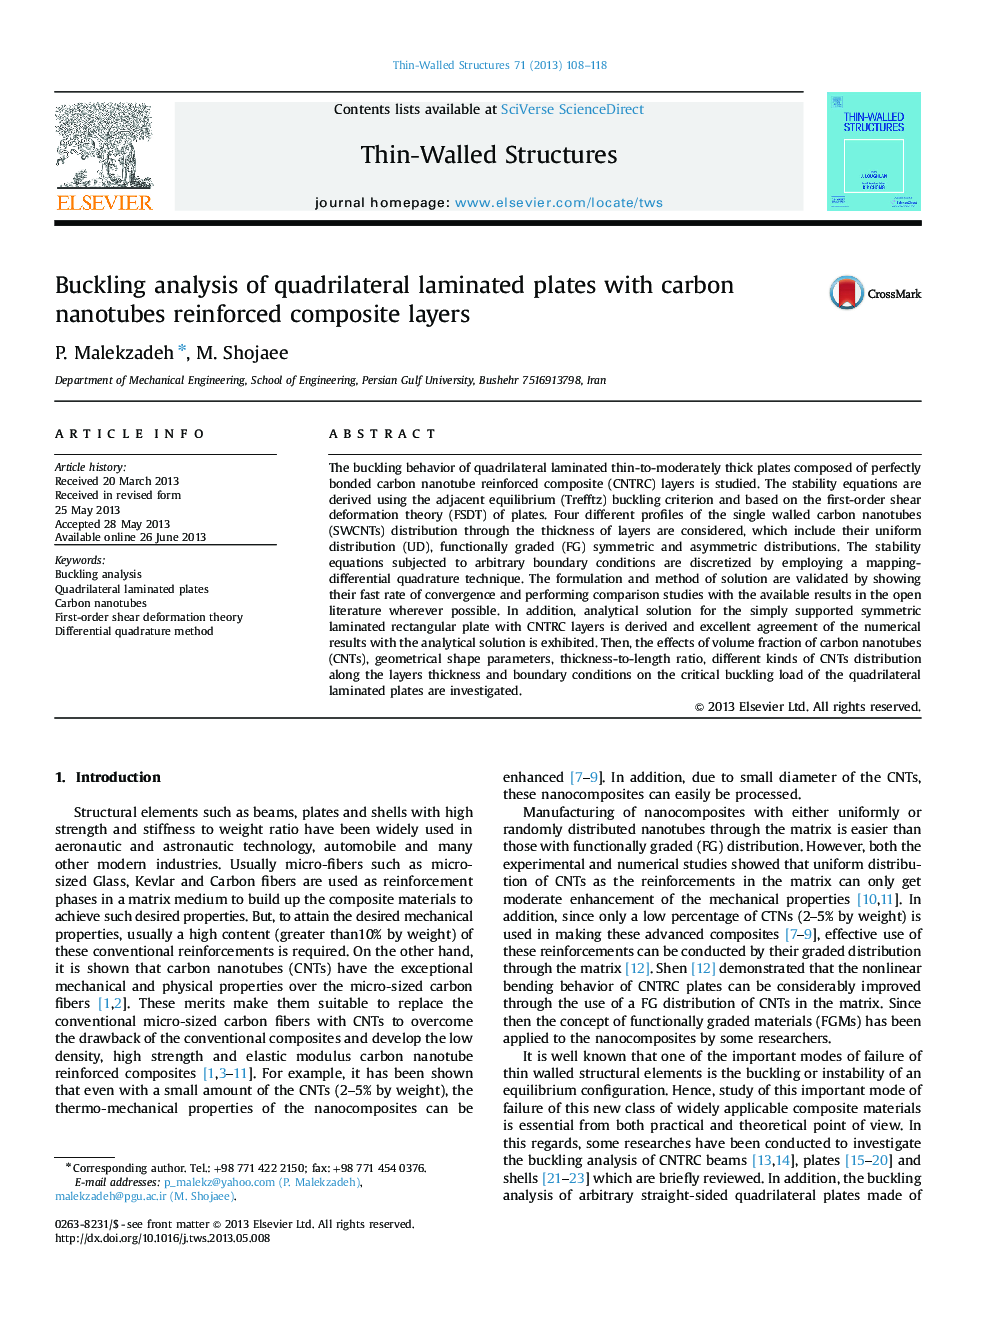 Buckling analysis of quadrilateral laminated plates with carbon nanotubes reinforced composite layers